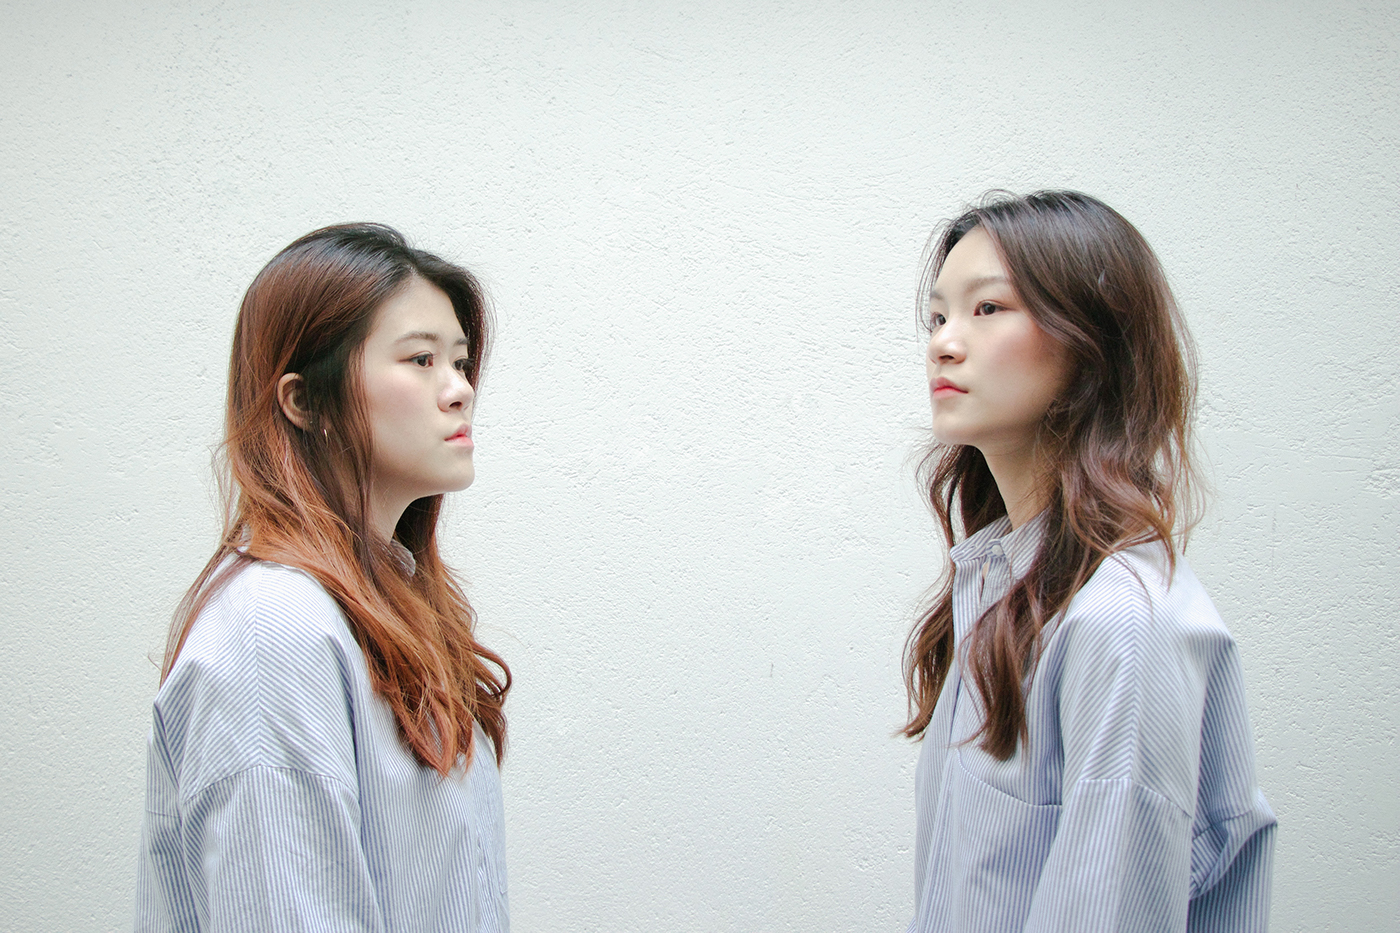 Twins twinning doppelgangers Relationships my other half Photography  art direction  relationship